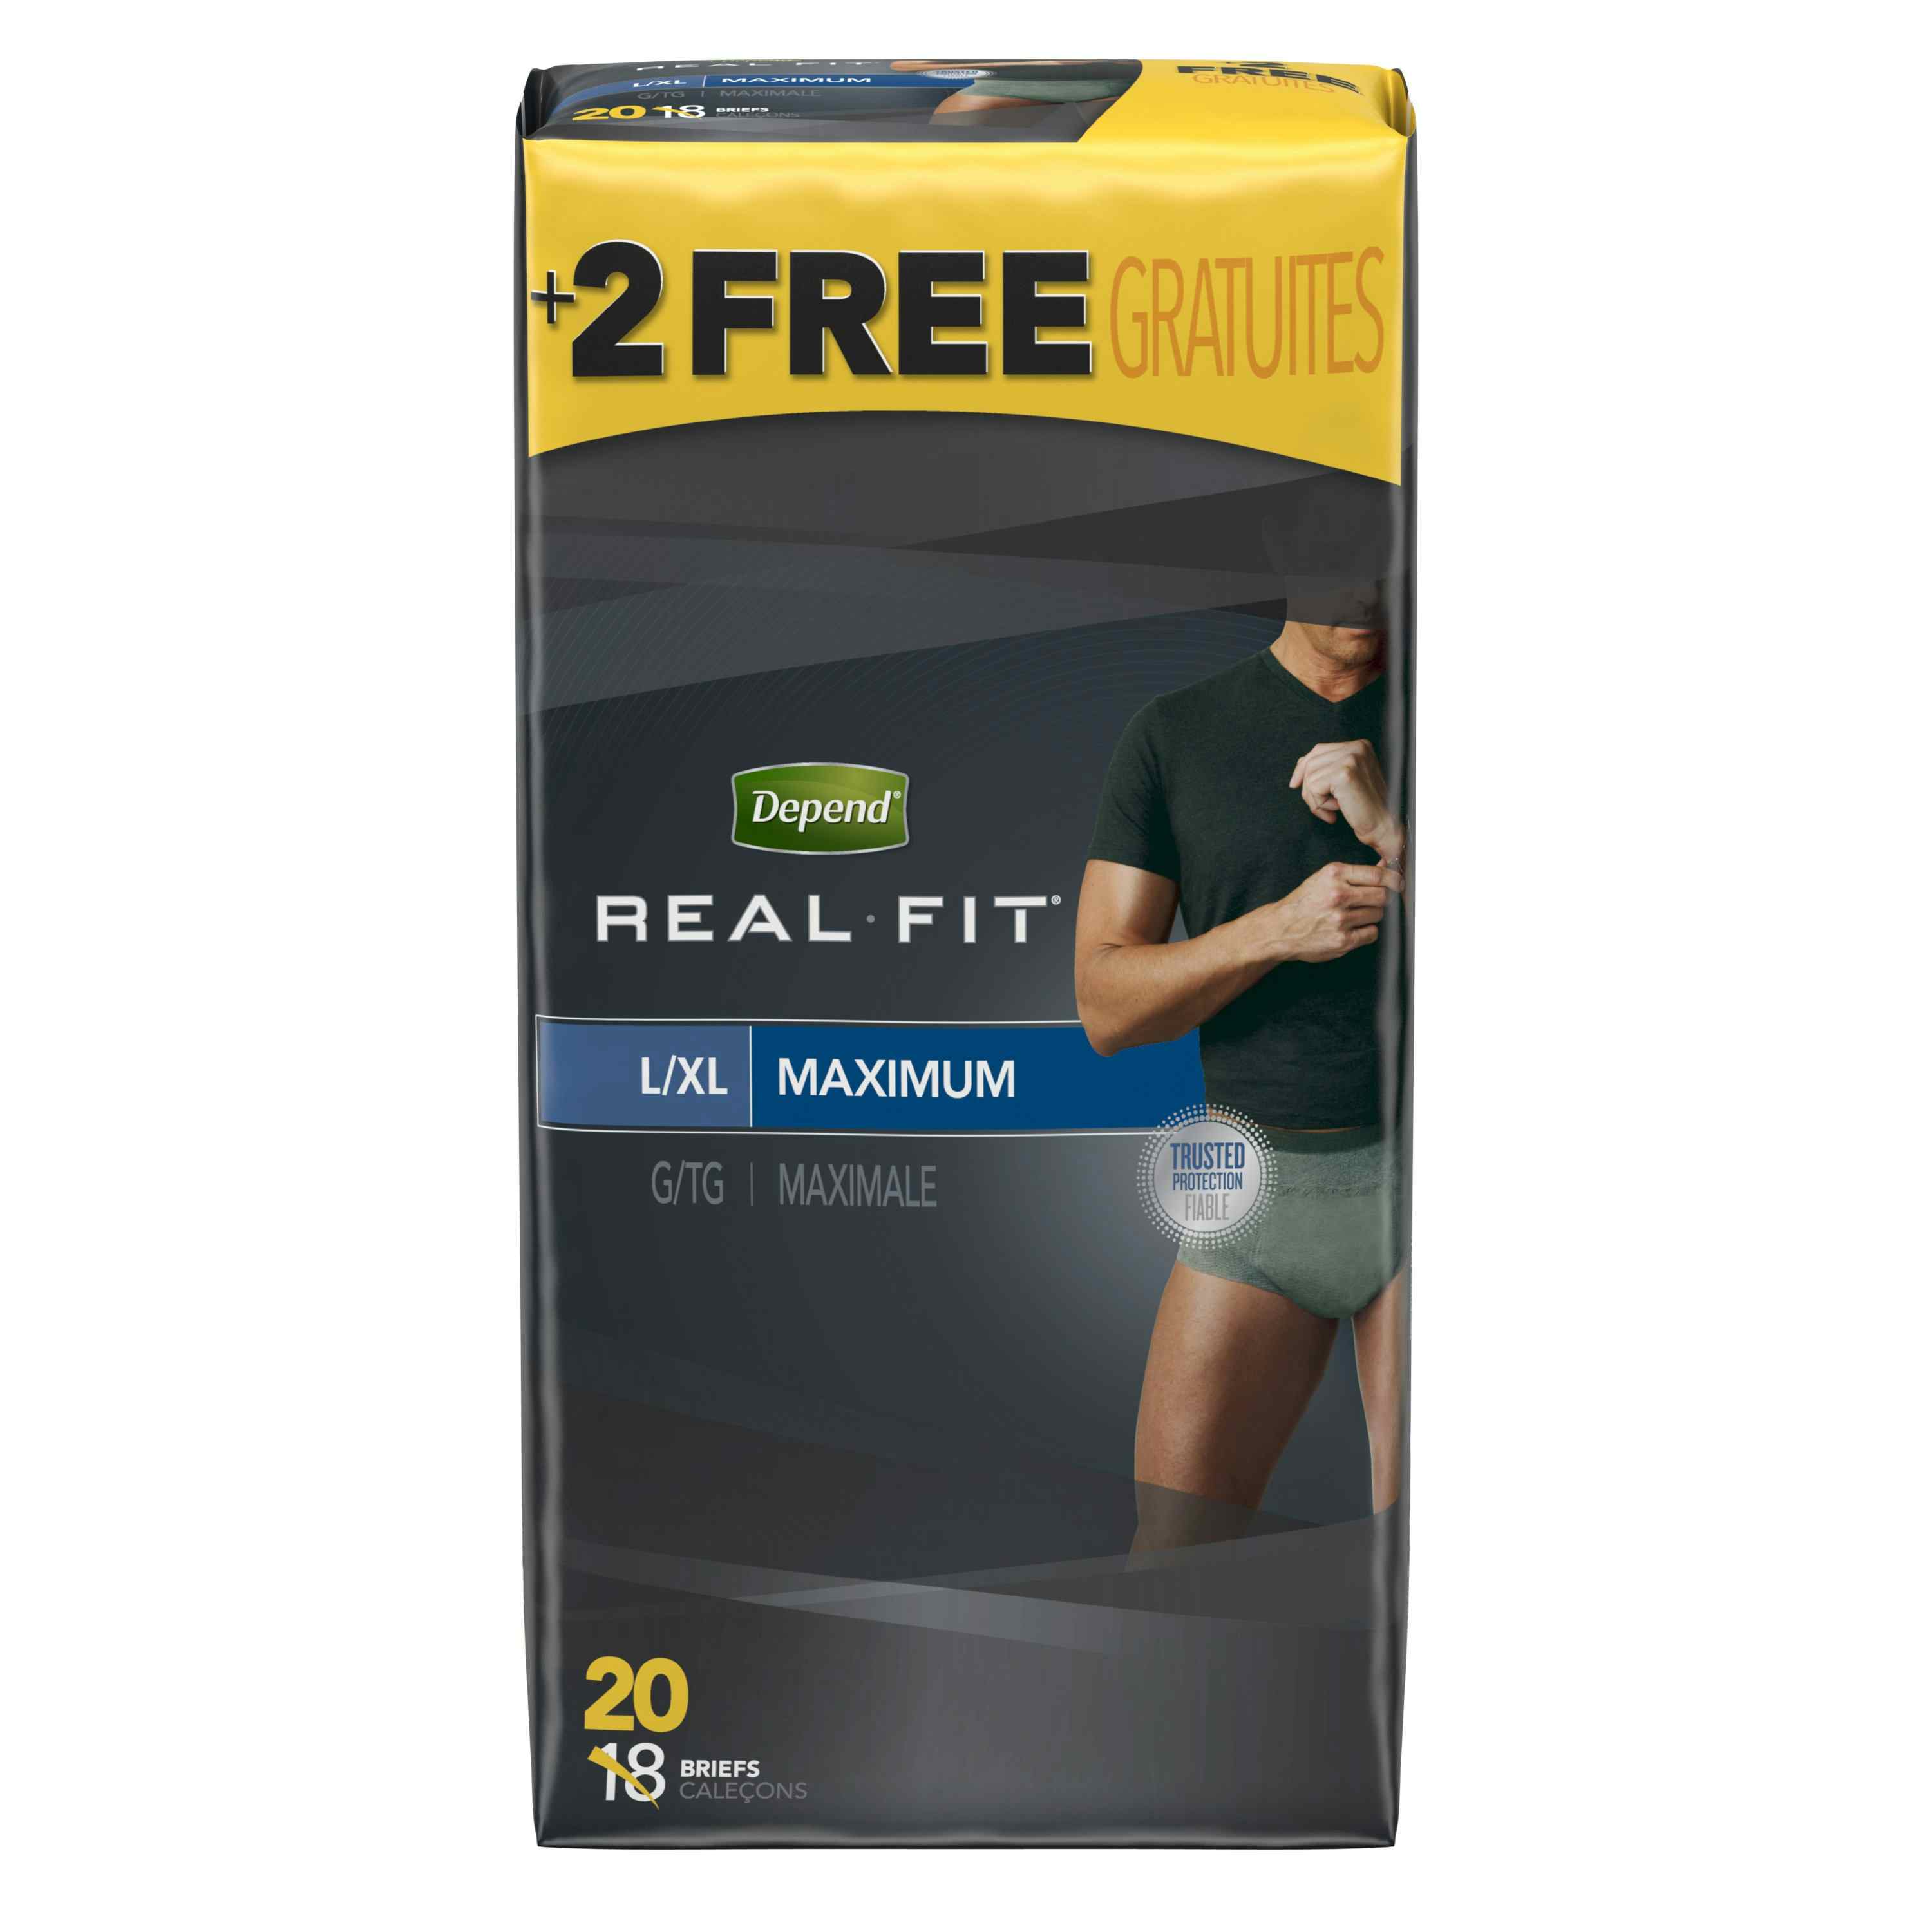 Depend Real Fit Disposable Male Adult Pull On Underwear with Tear Away Seams, Heavy Absorbency, 50979, Large/XL (38-50") - Case of 40